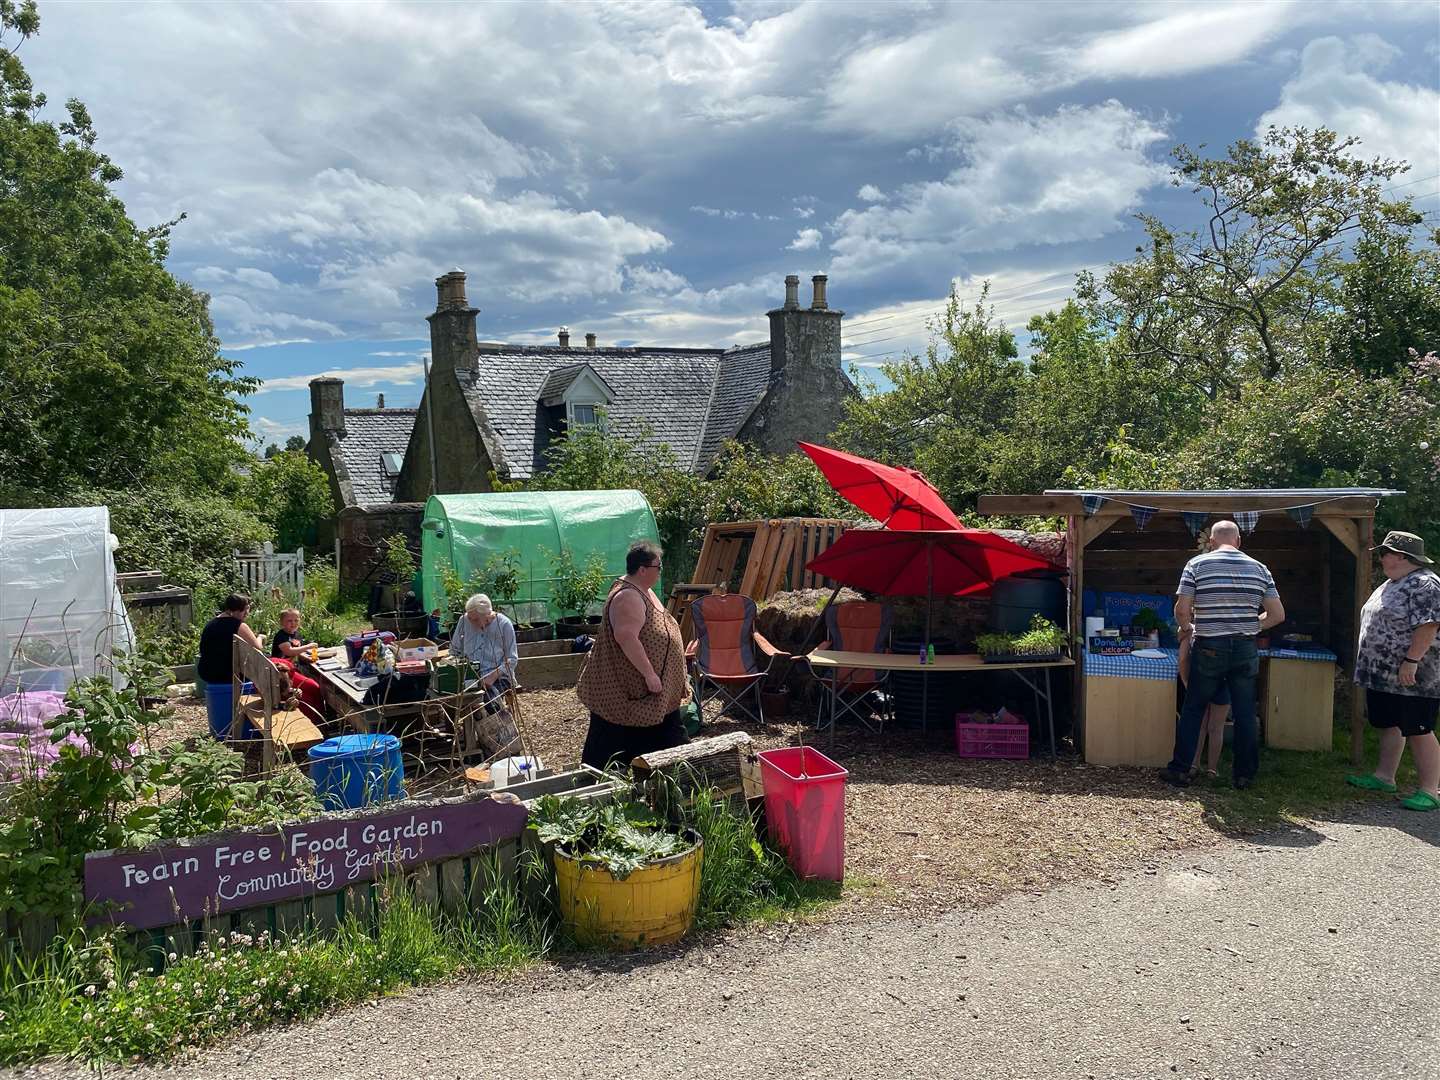 Groups such as this one in Fearn are at the heart of community-led climate action in the Highlands and Islands.